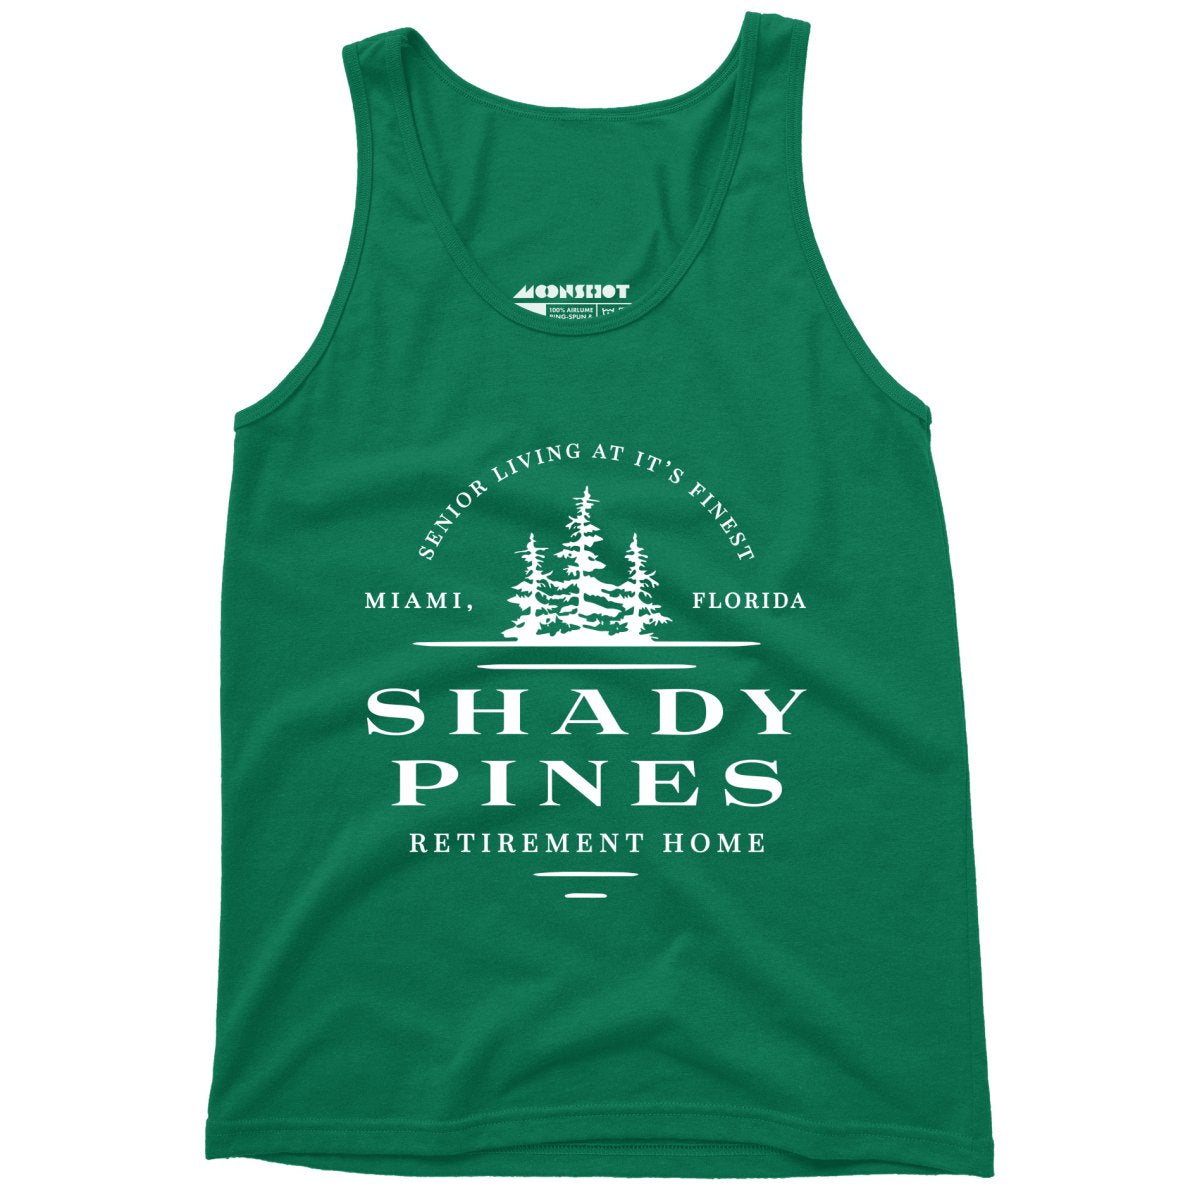 Shady Pines Retirement Home - Unisex Tank Top